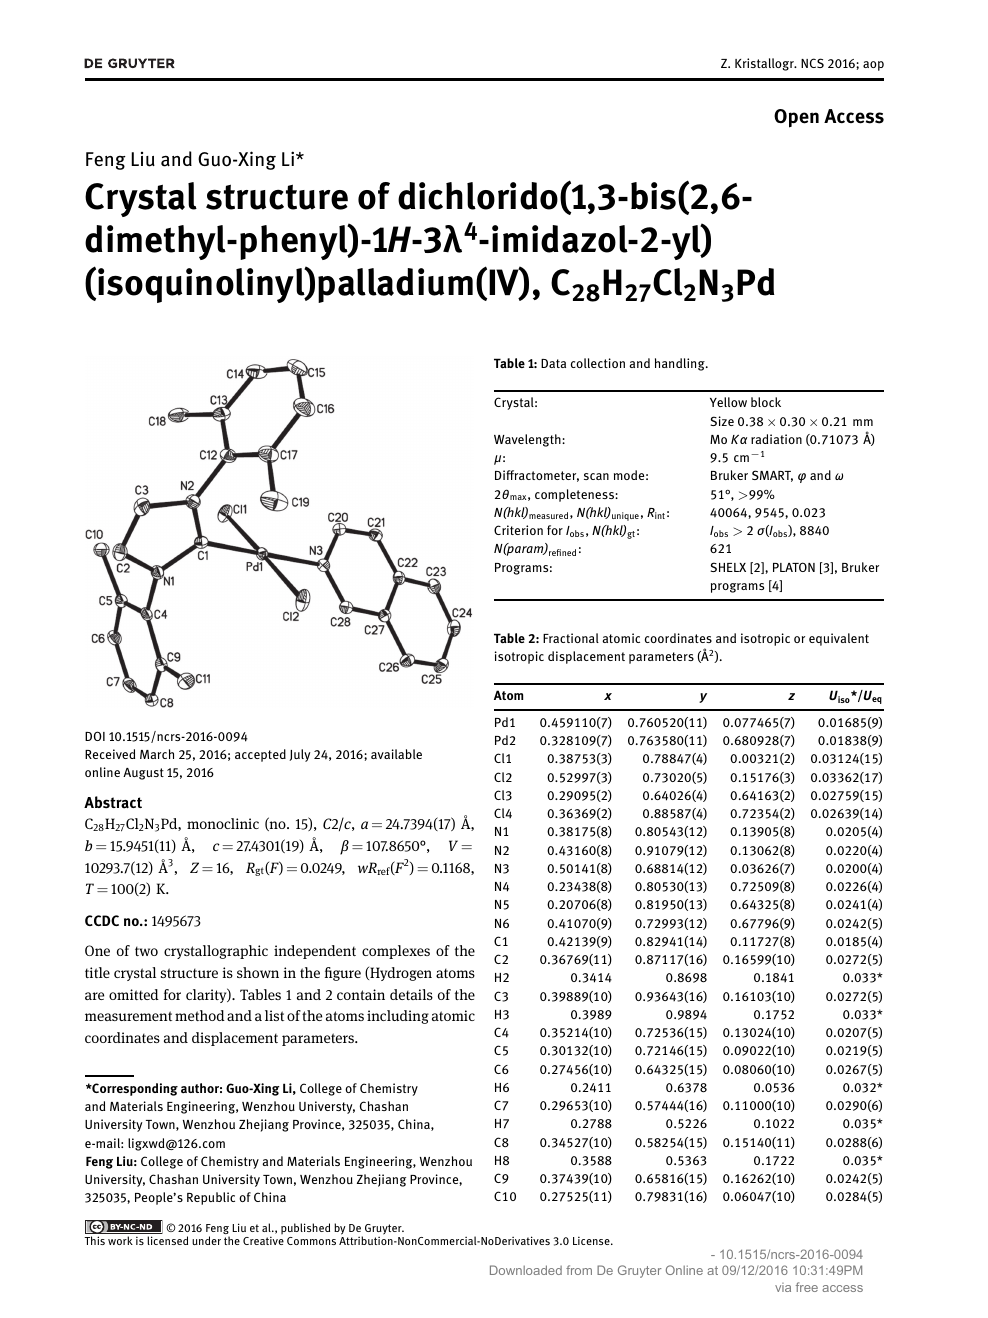 Crystal Structure Of Dichlorido 1 3 Bis 2 6 Dimethyl Phenyl 1h 3l4 Imidazol 2 Yl Isoquinolinyl Palladium Iv C28h27cl2n3pd Topic Of Research Paper In Chemical Sciences Download Scholarly Article Pdf And Read For Free On Cyberleninka Open Science Hub